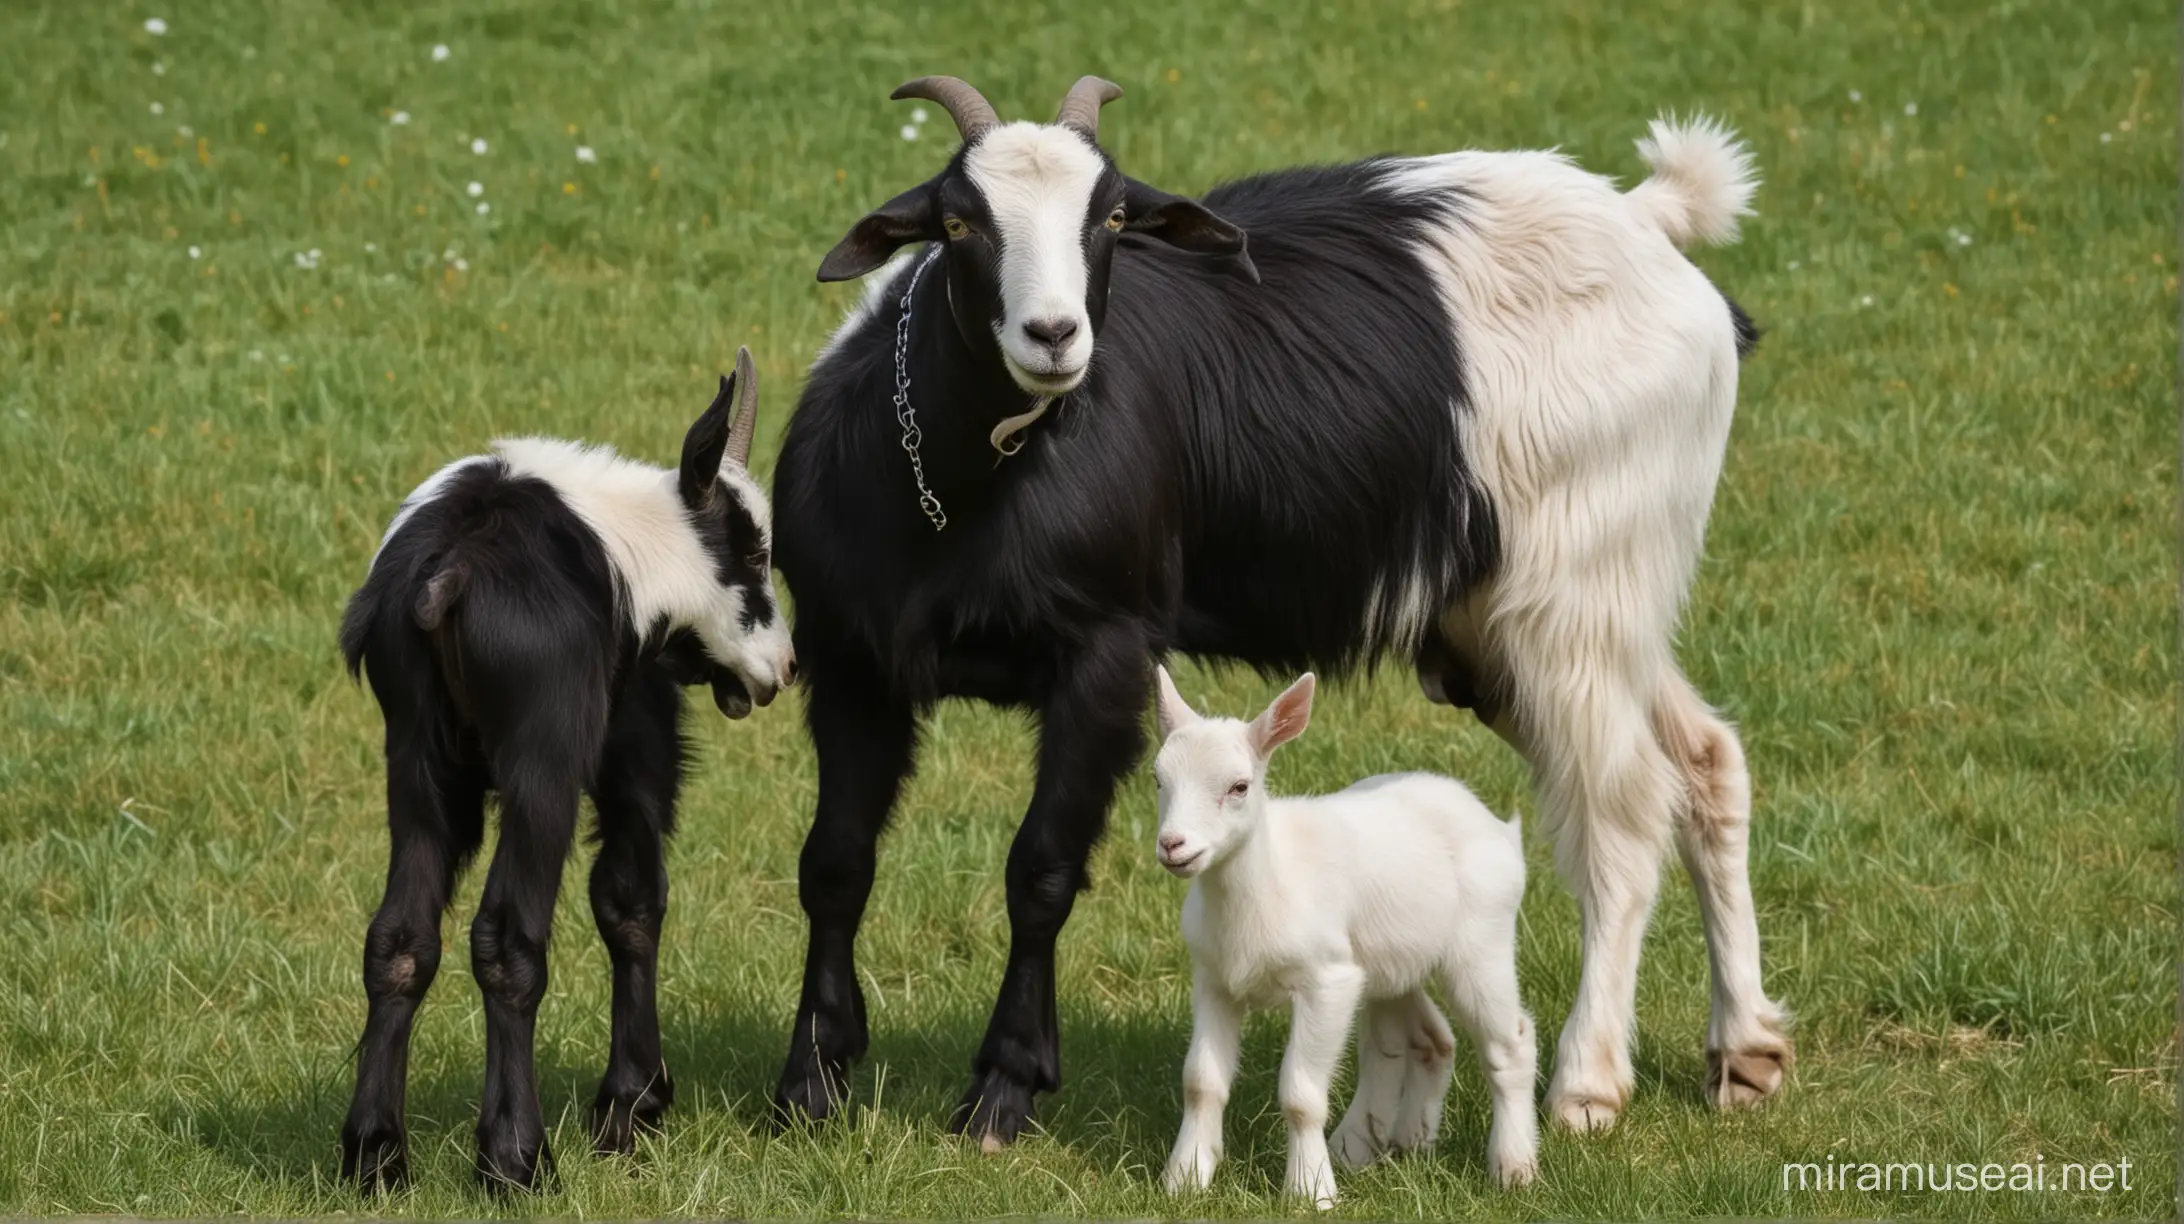 Black and White Goat Mother and Baby Grazing in Serene Fields